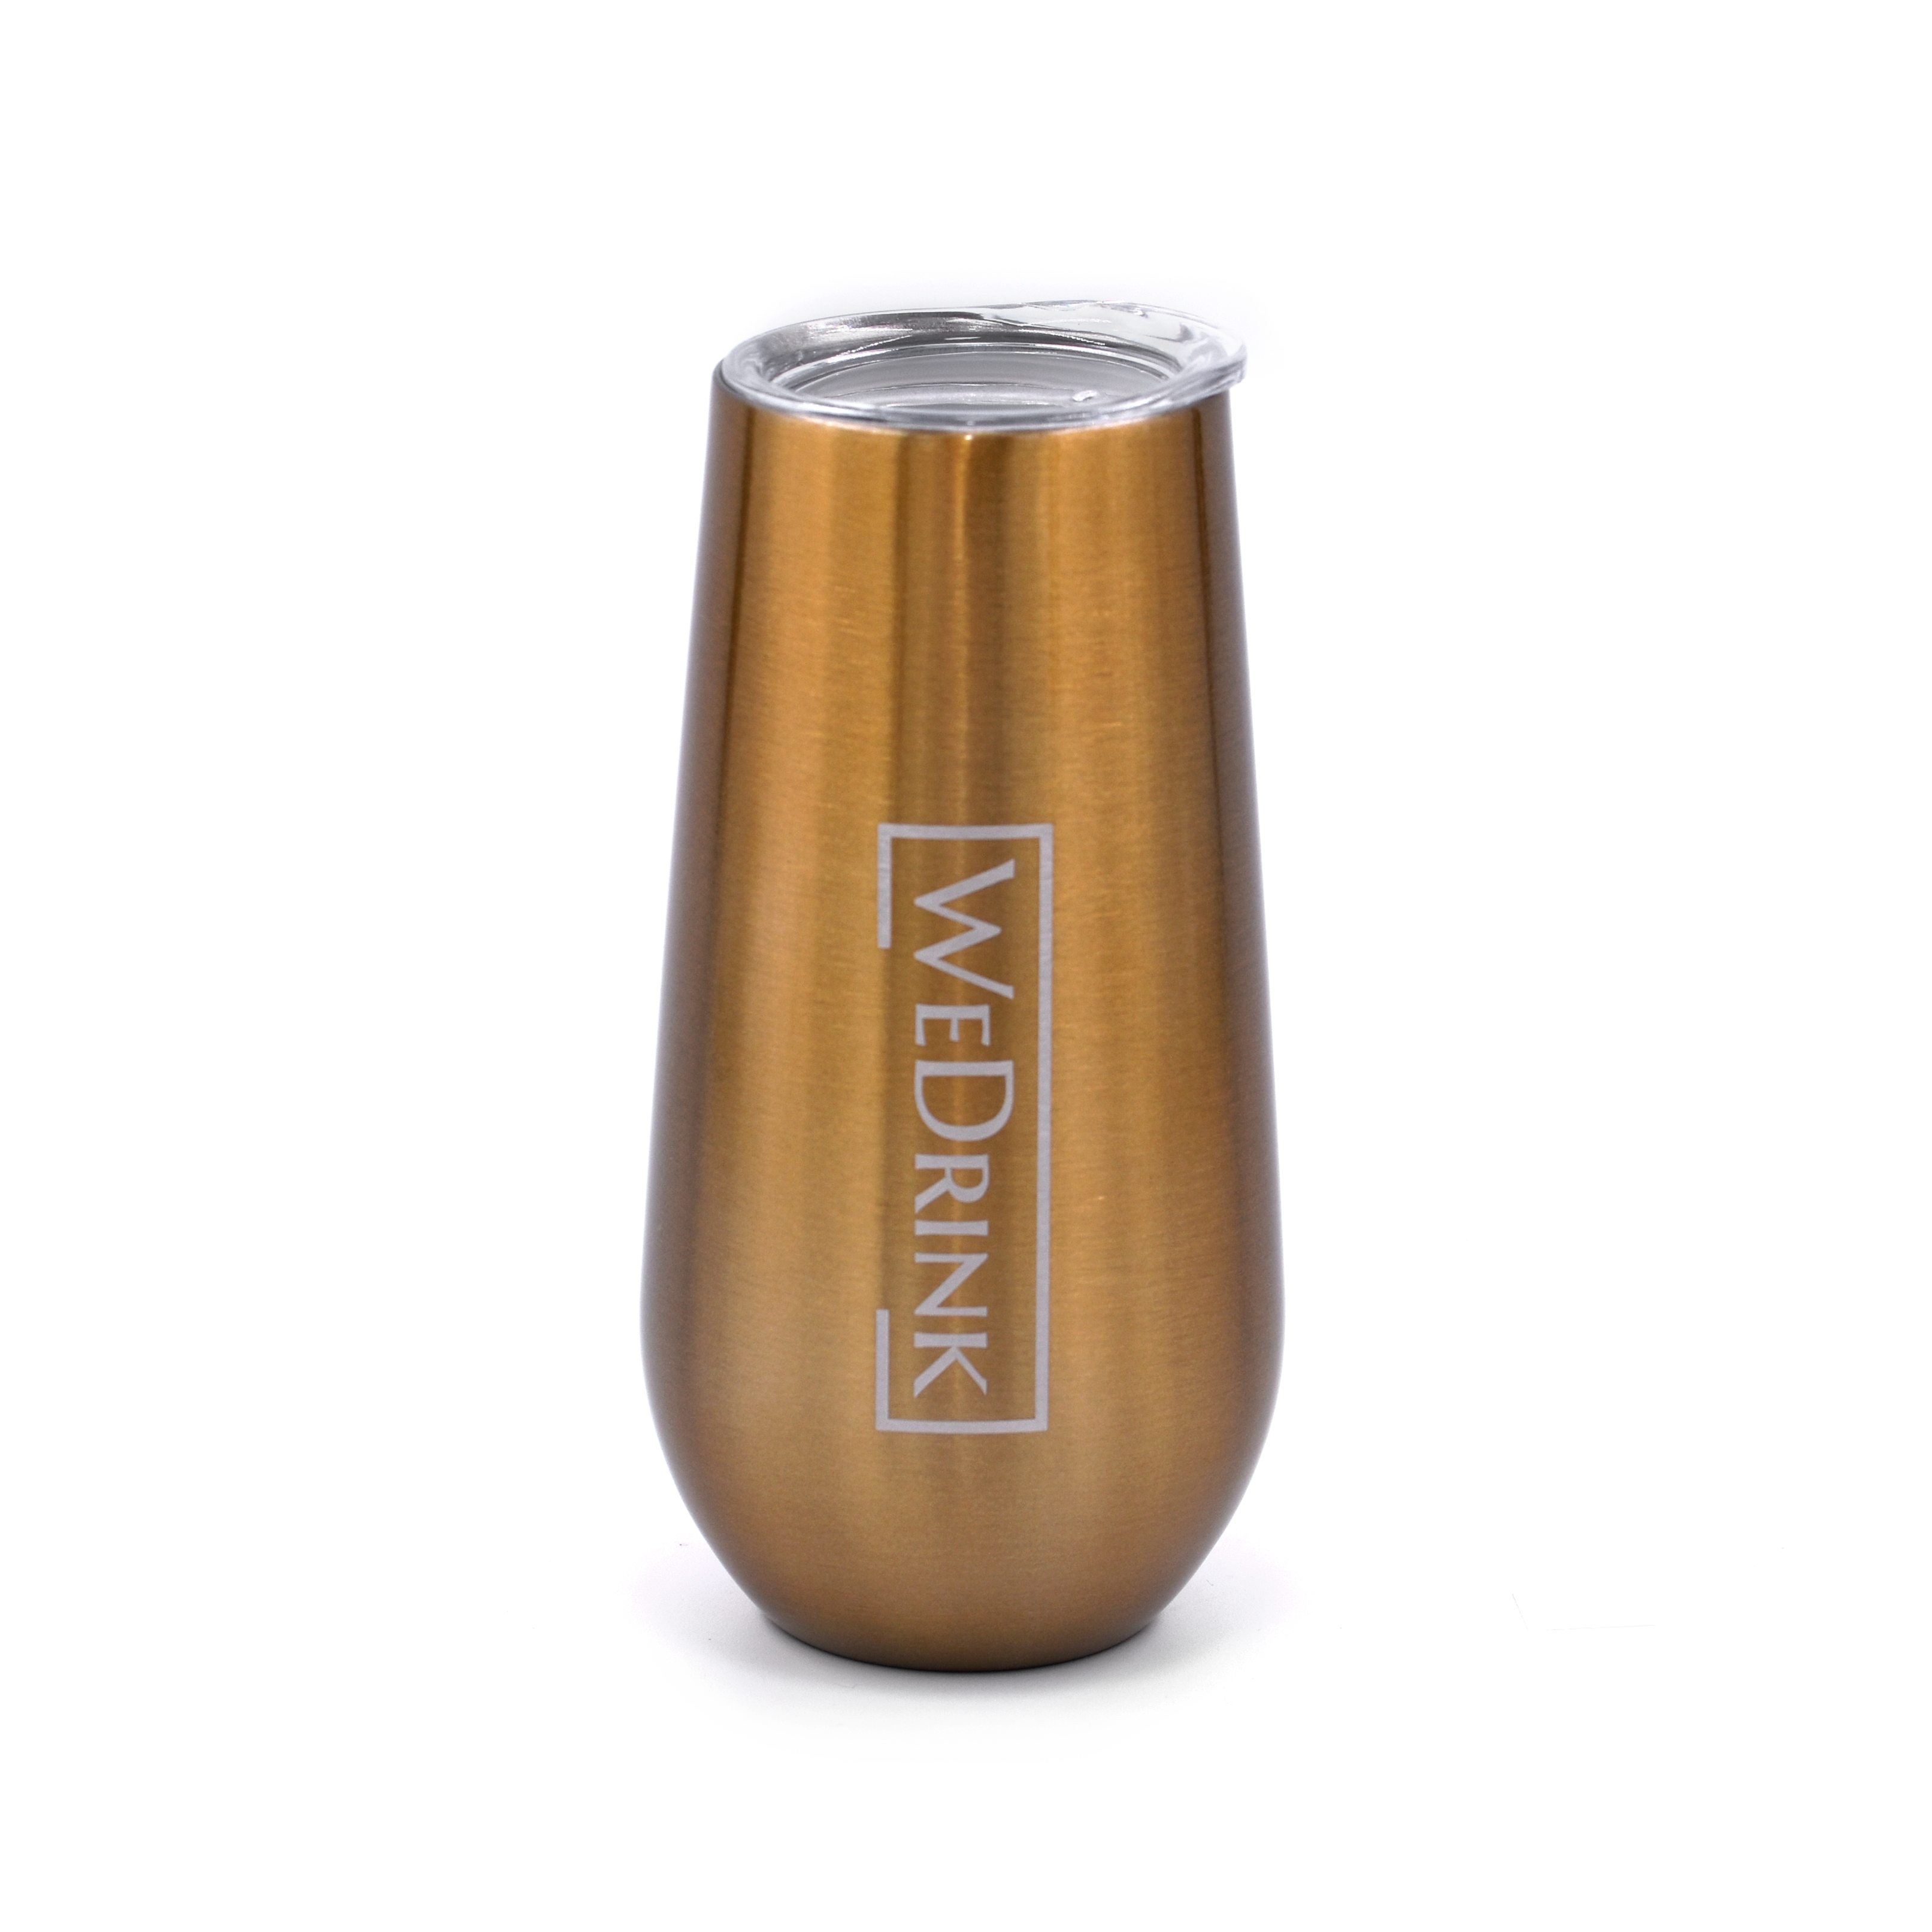 WEDRINK Mimosa cup 150 ml Royal Gold (WD-MC-05L)